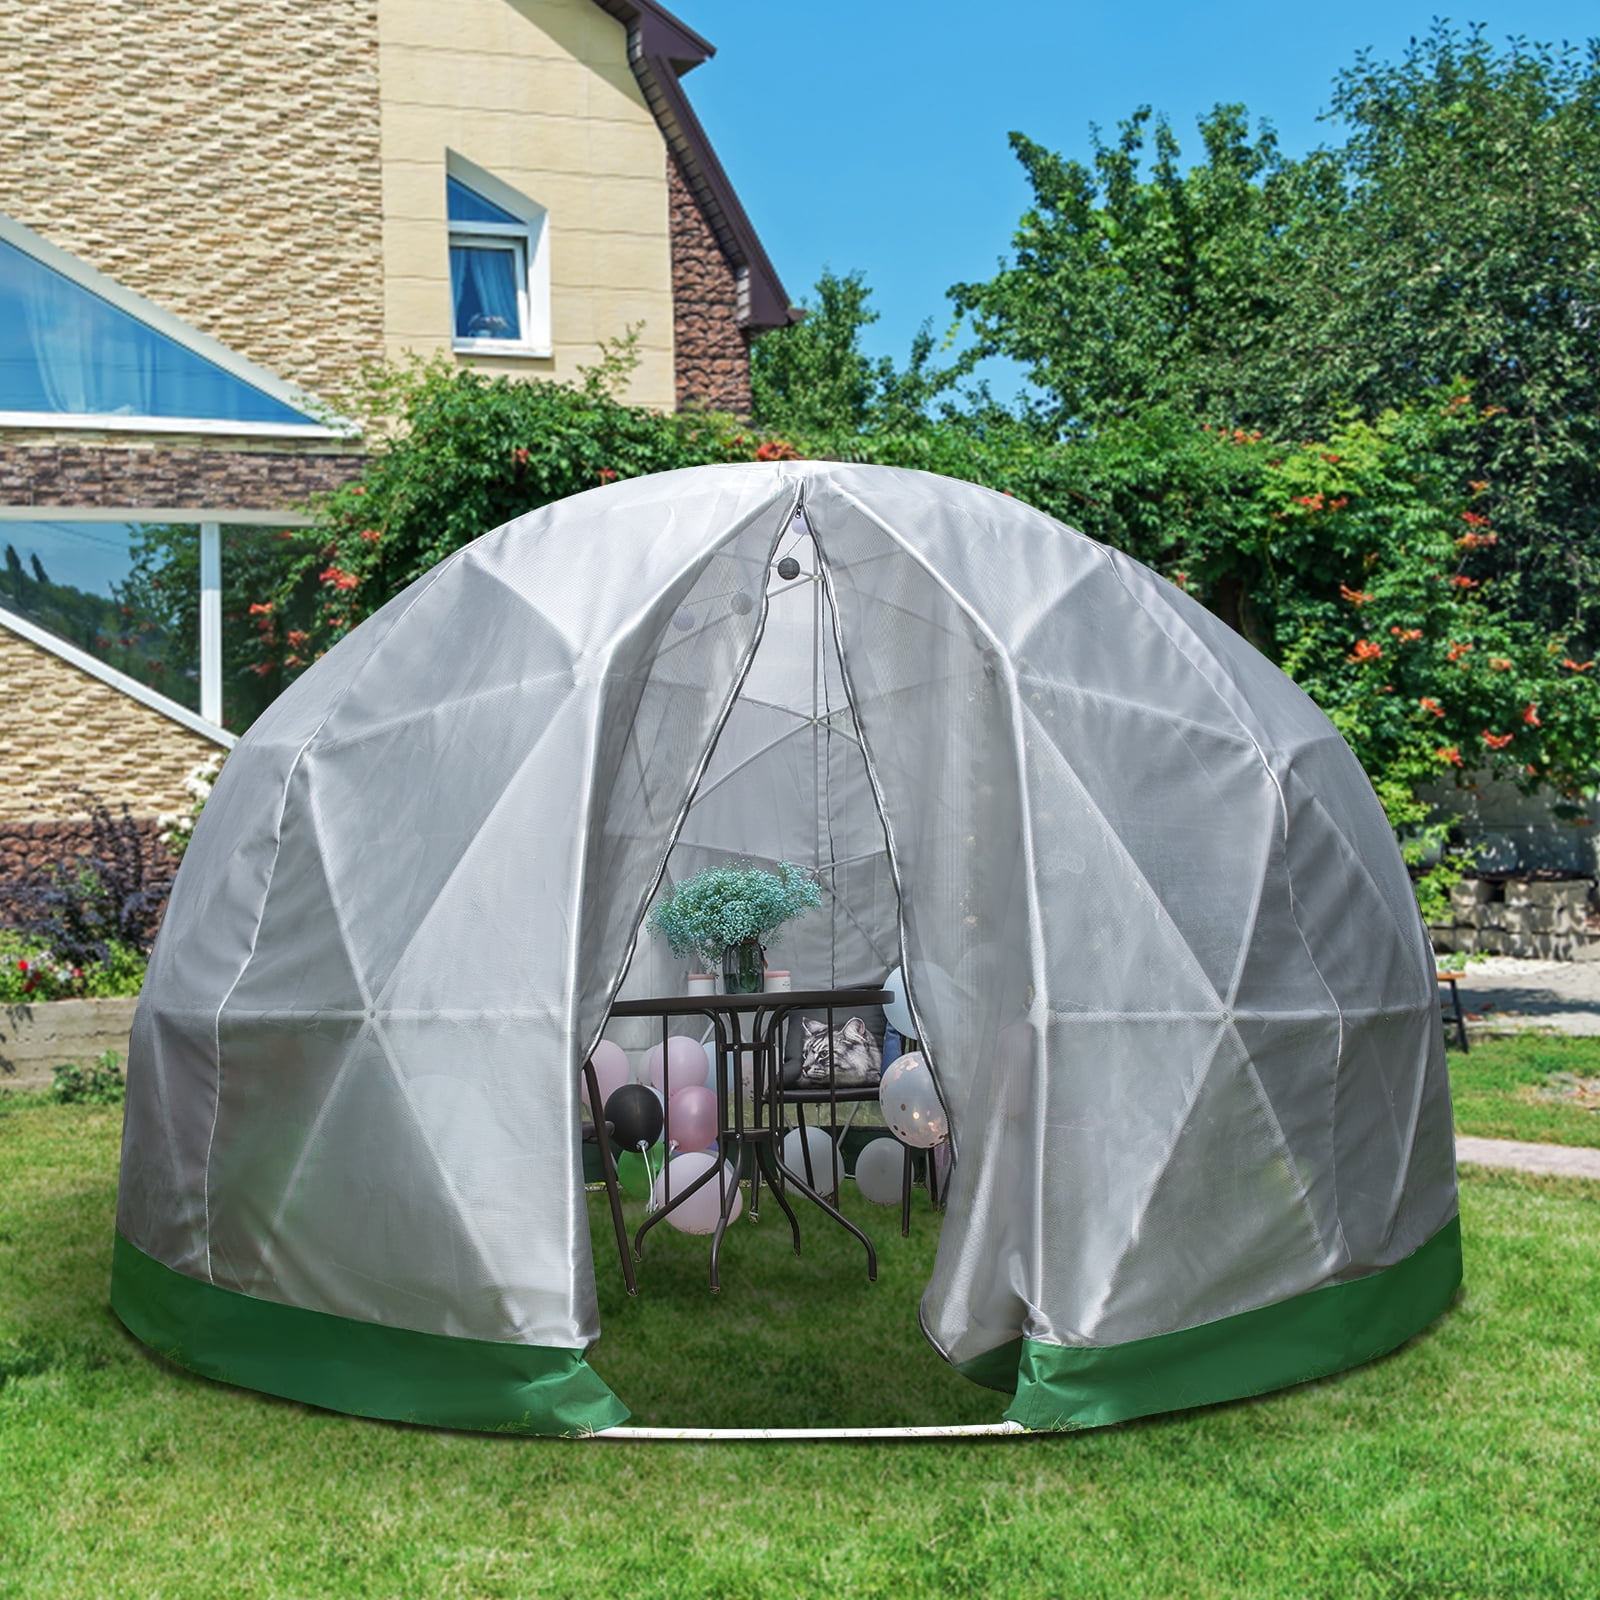 Inflatable Tents For Sale Used Party Tents For Sale, Bubble Tent